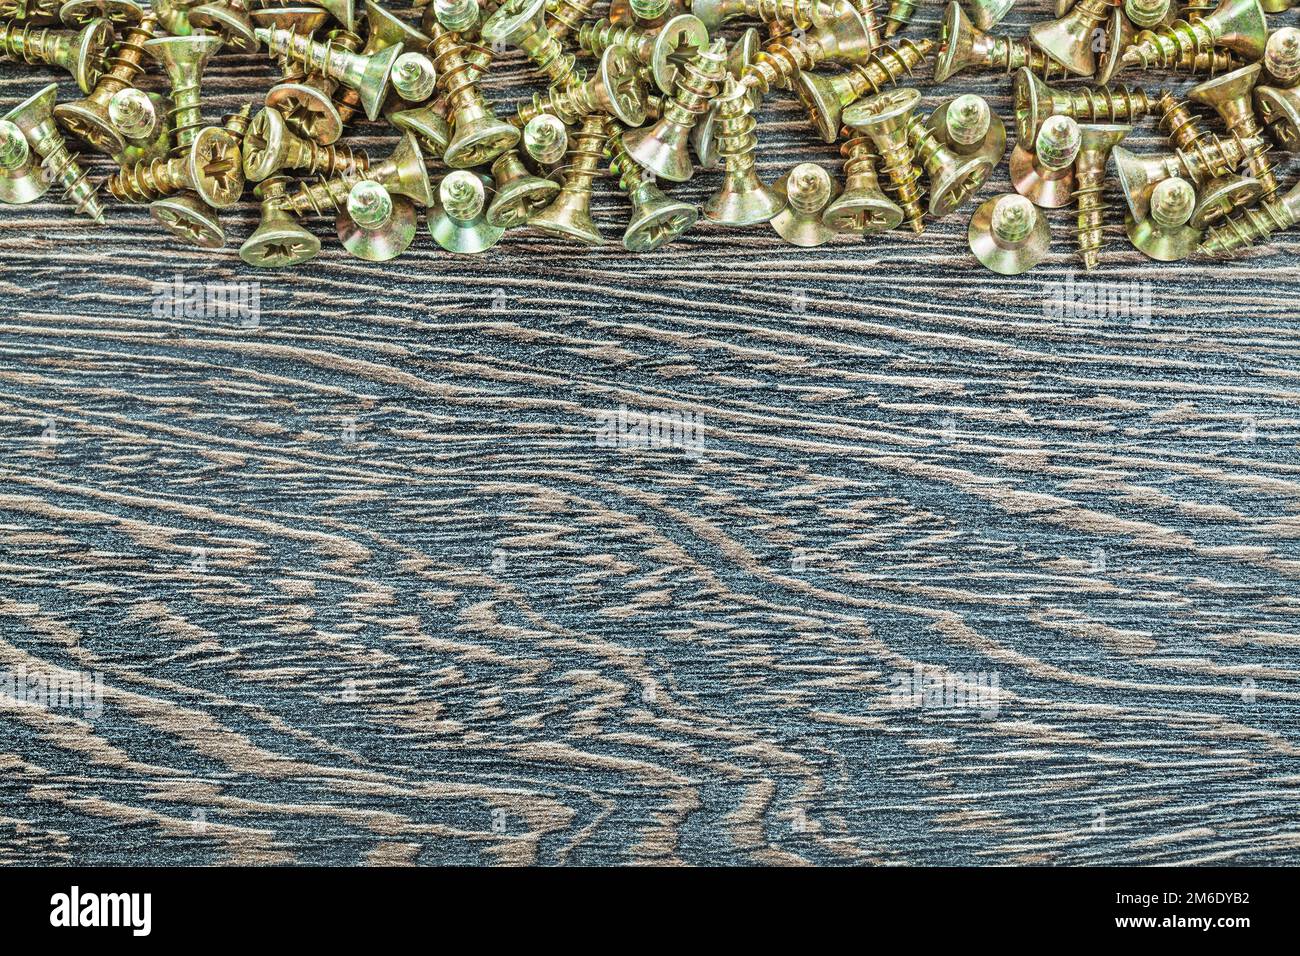 Stack of screws on wooden board. Stock Photo